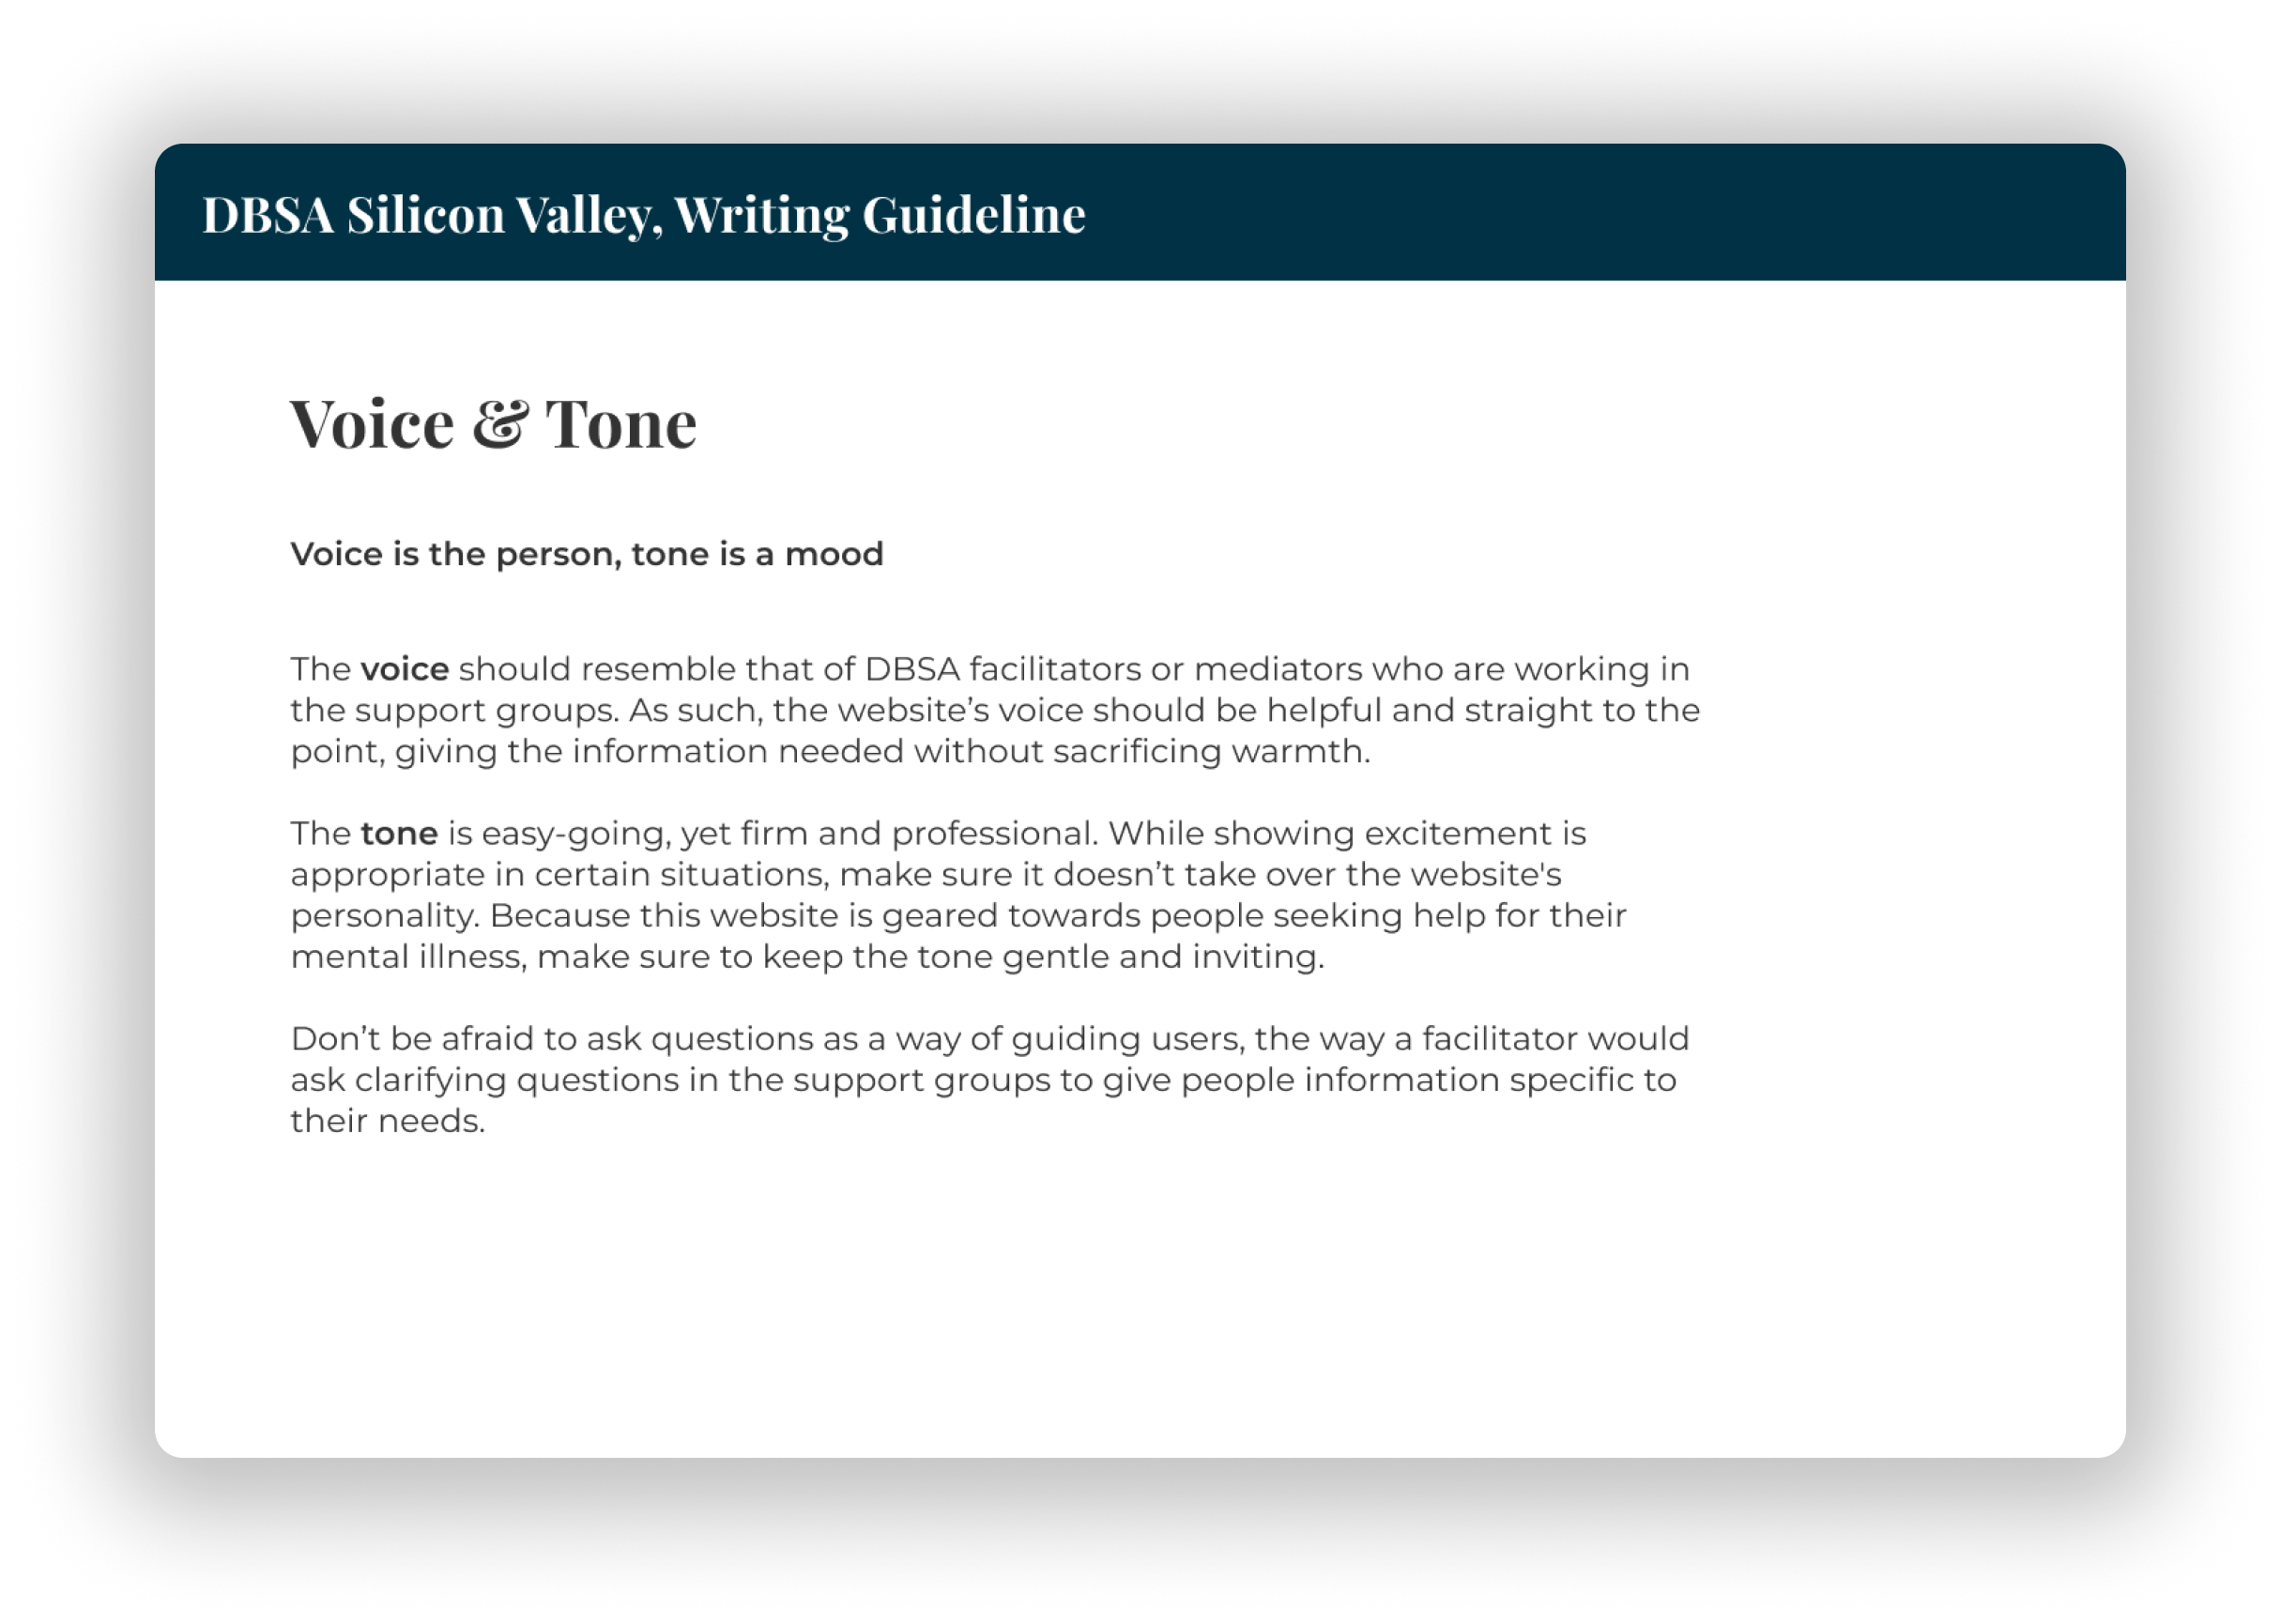 Voice and tone for the writing styleguide